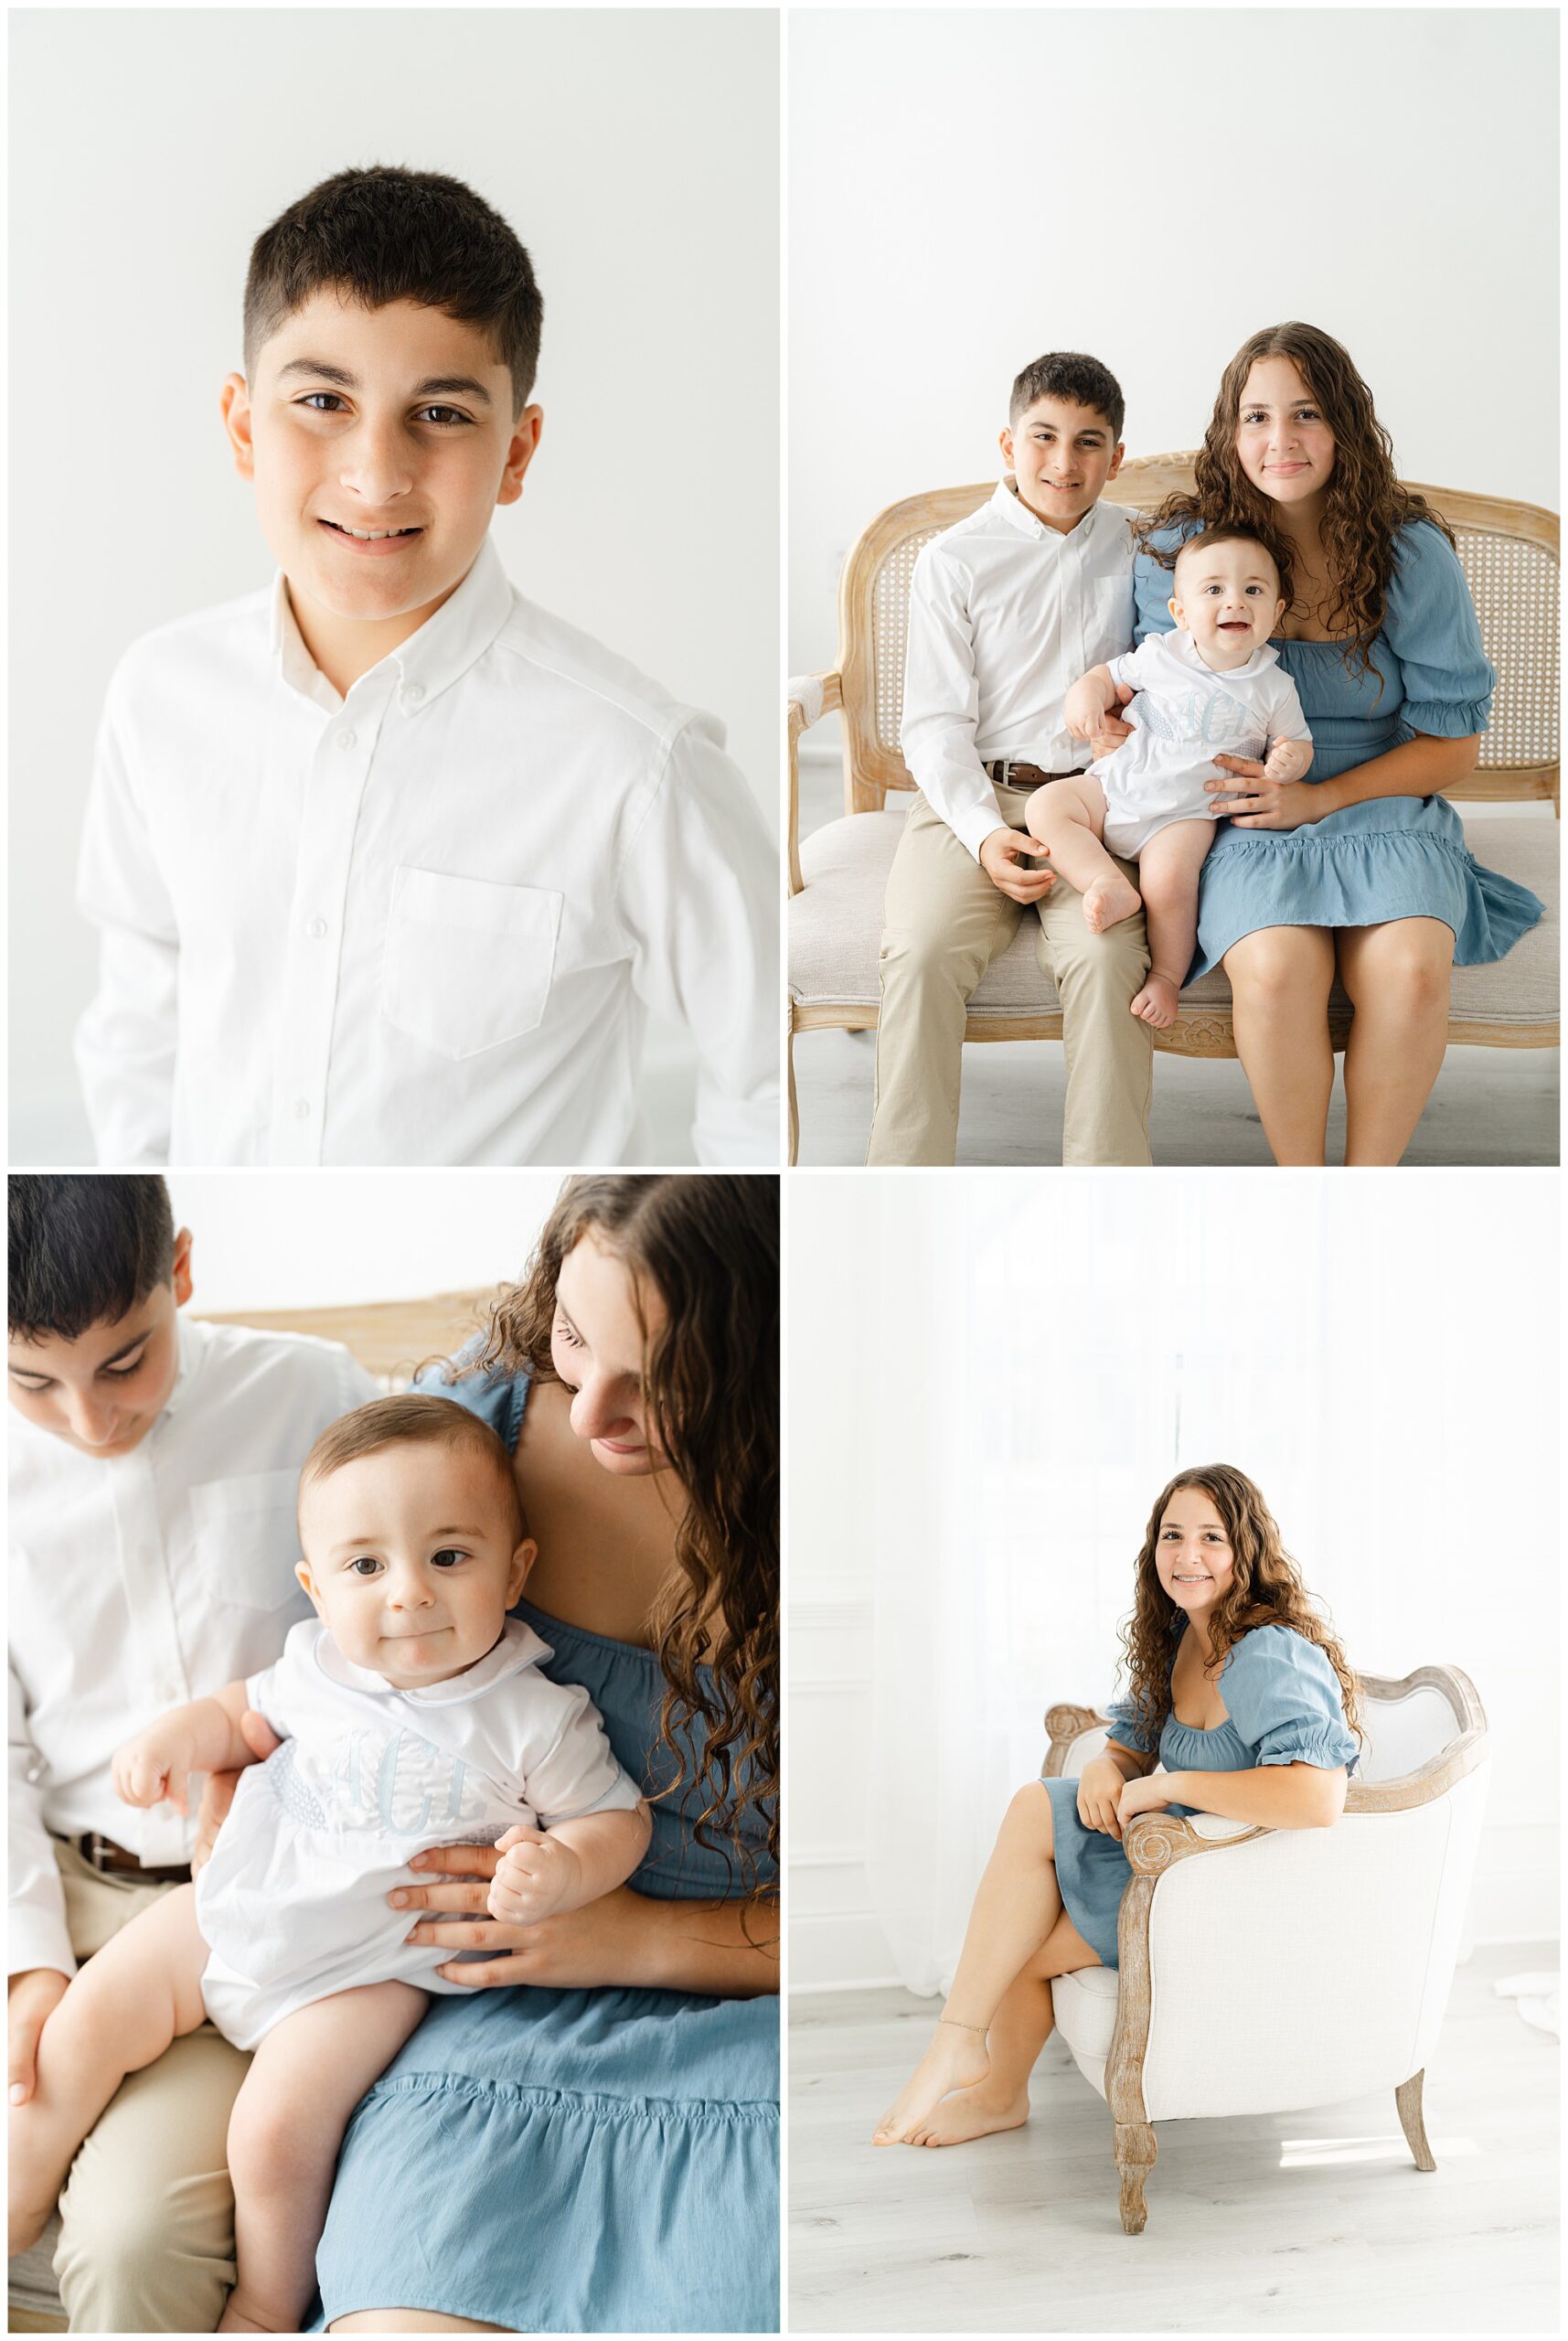 Portraits of three siblings together and individually from an Atlanta studio photo session.